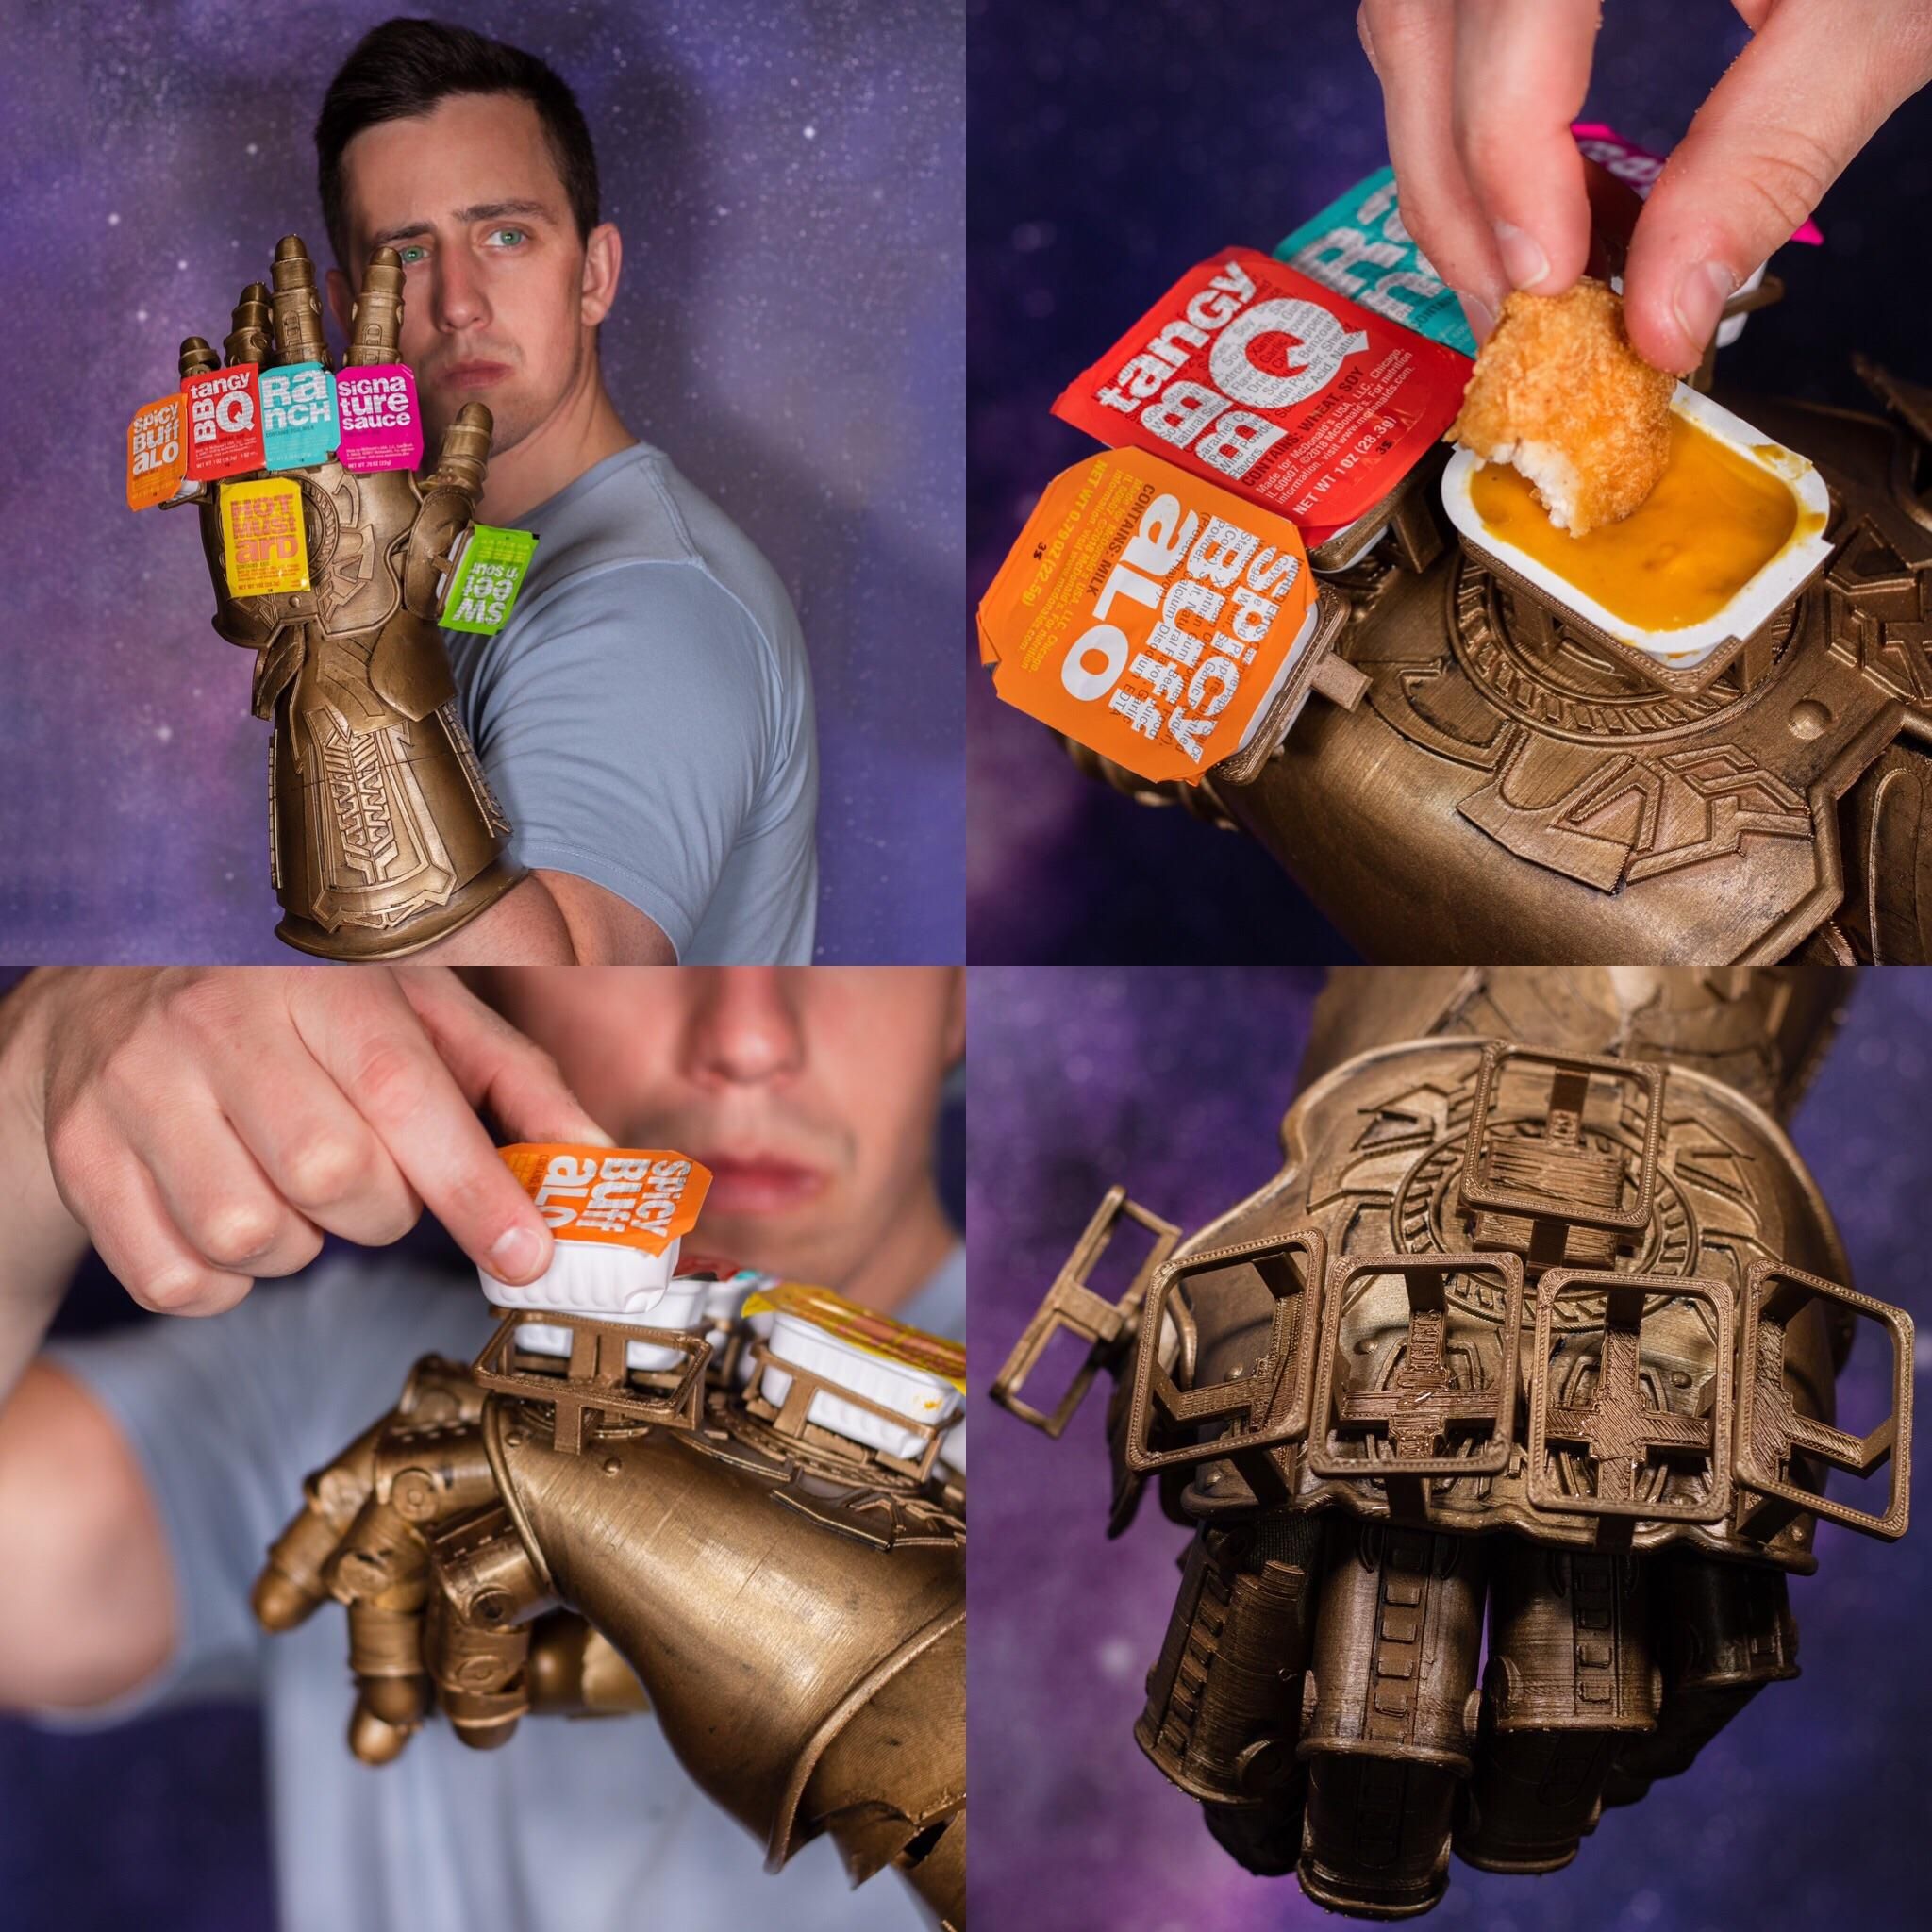 For fun I design fake products, behold The Infinity Saucelet, wield all of your favorite fast food sauces at once. Cover everything in sauce...whatever it takes.